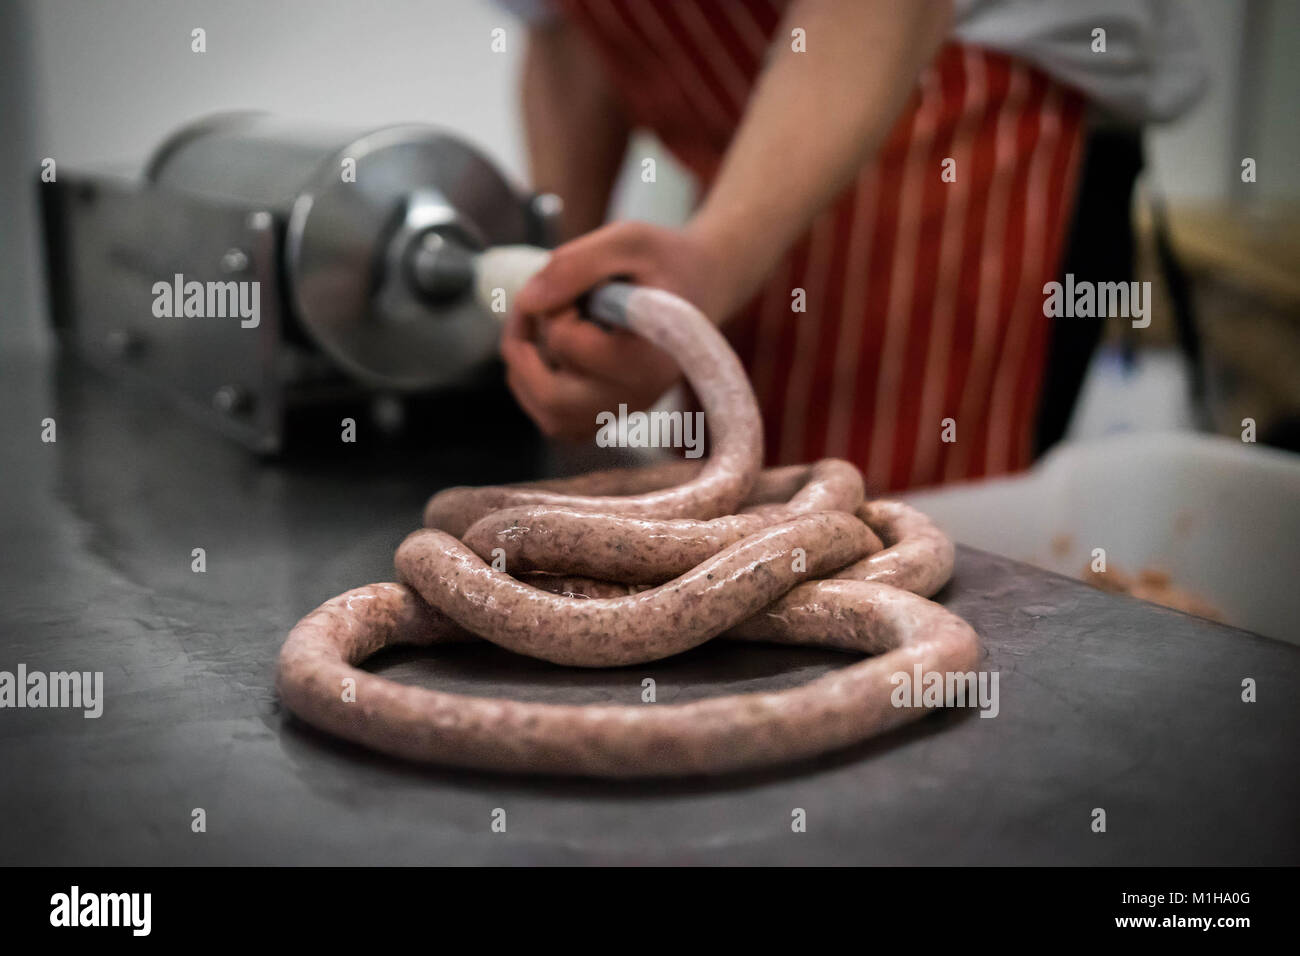 A butcher making sausages Stock Photo